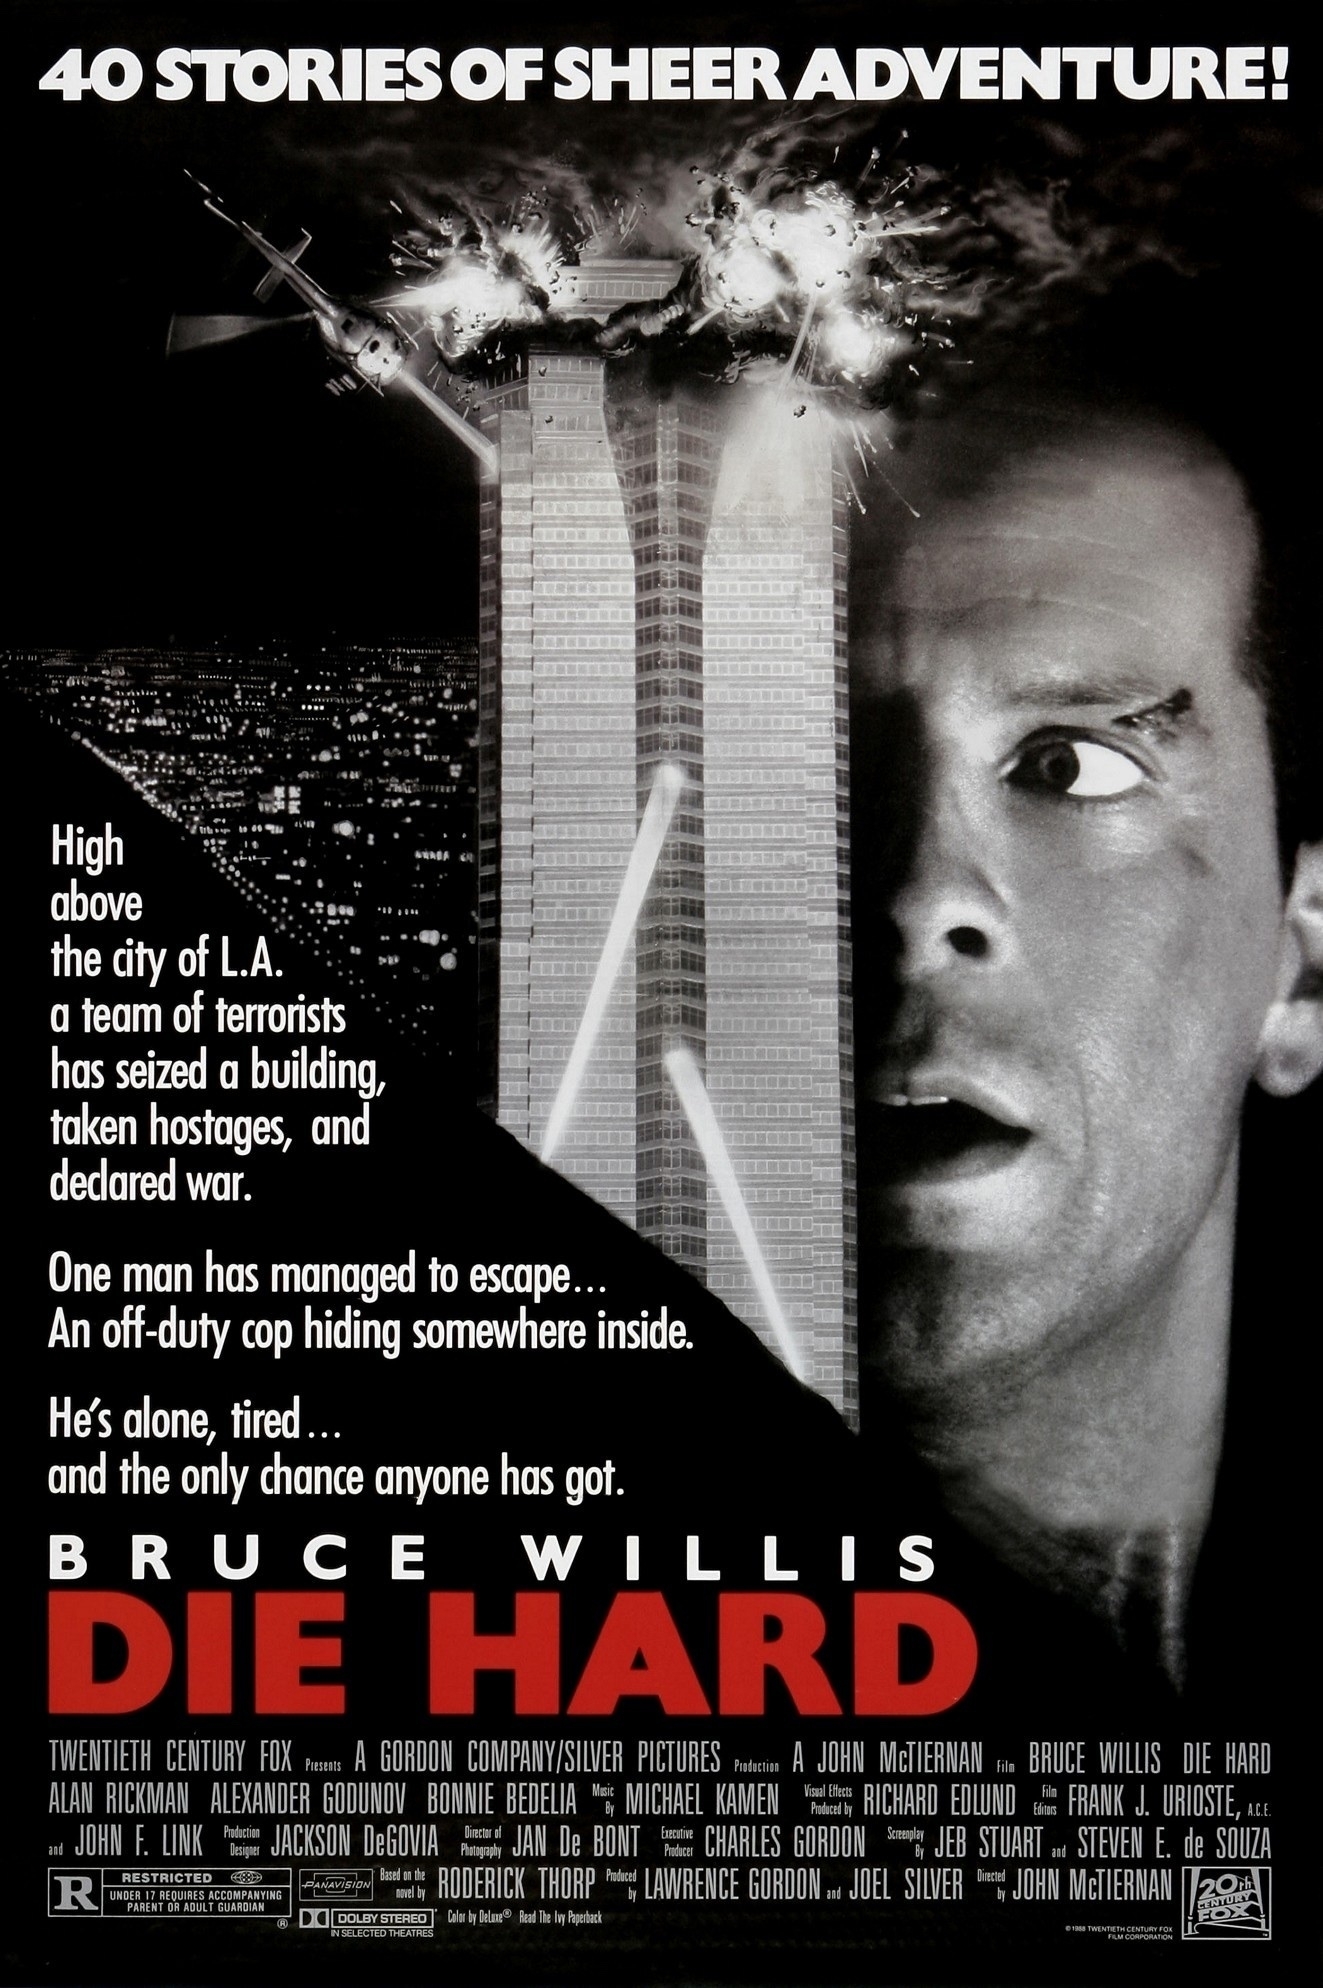 The cinema release poster for the movie Die Hard. A head shot of the actor Bruce Willis and a tall office building with flames exploding from the top floors.